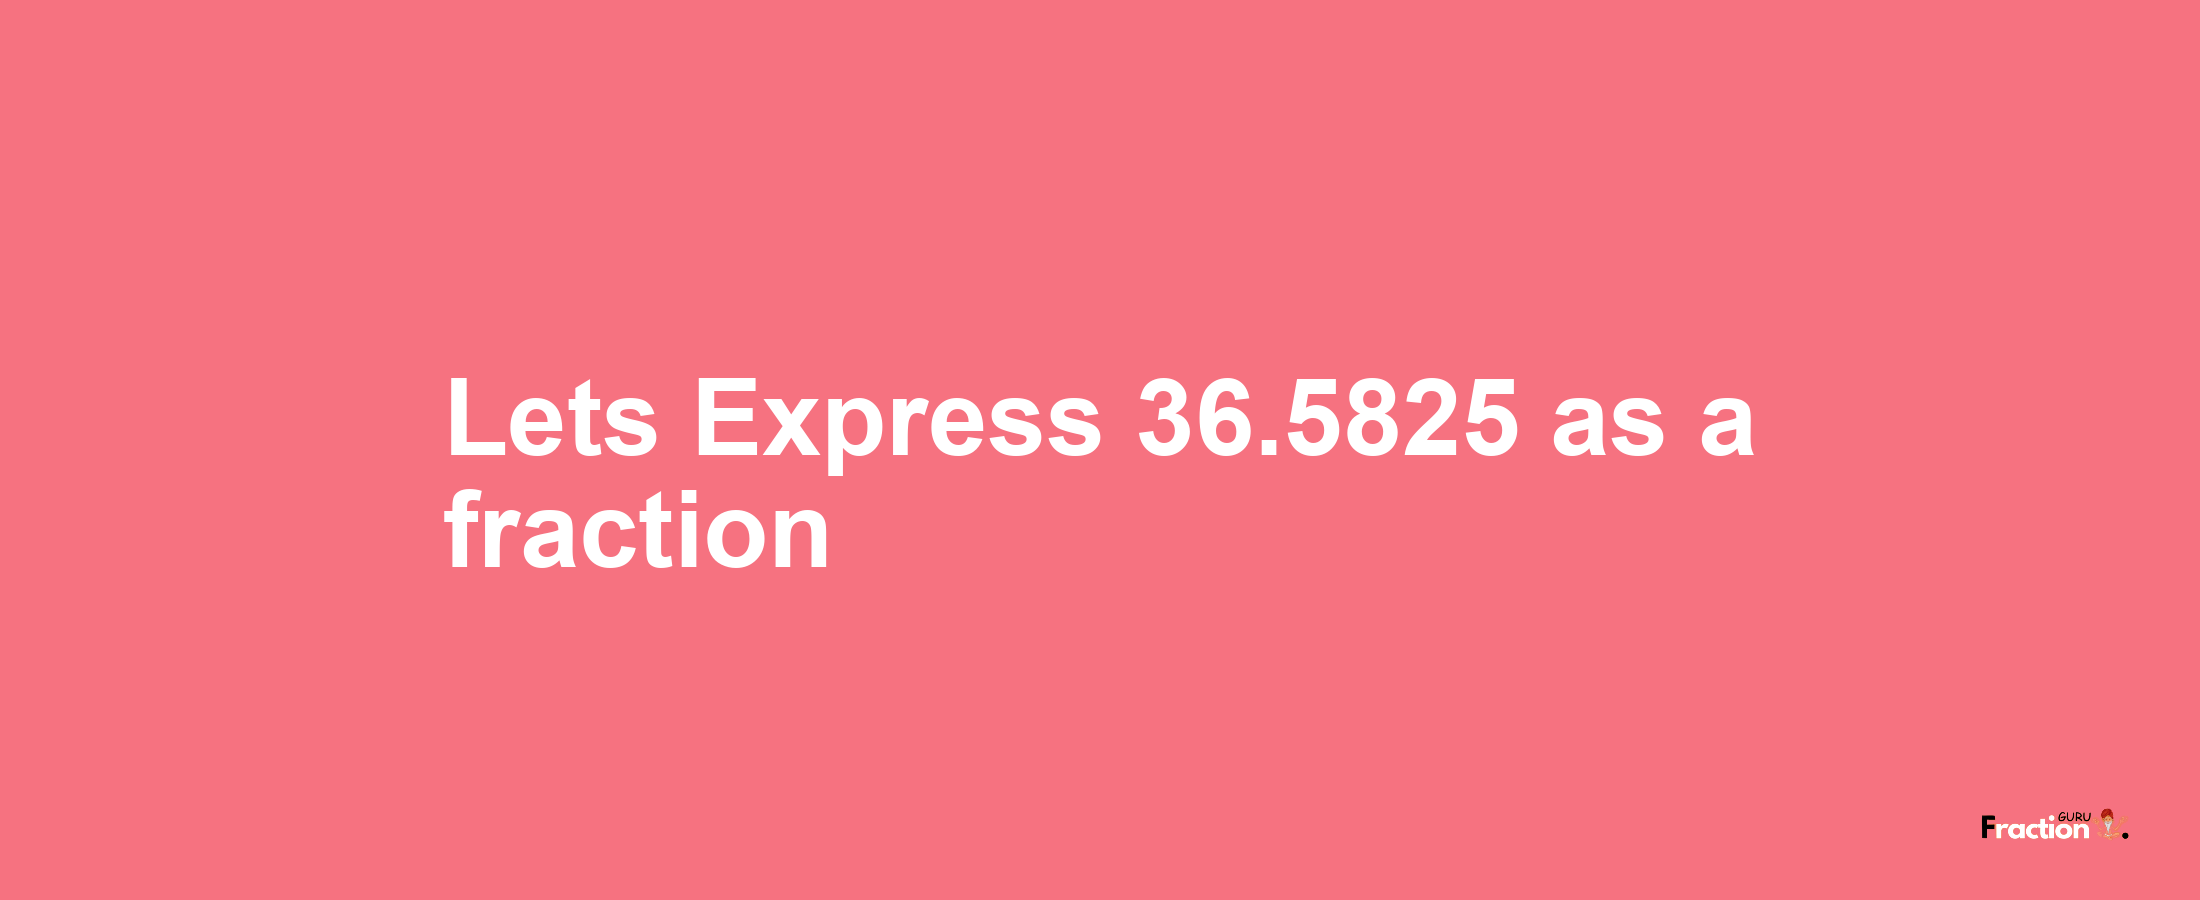 Lets Express 36.5825 as afraction